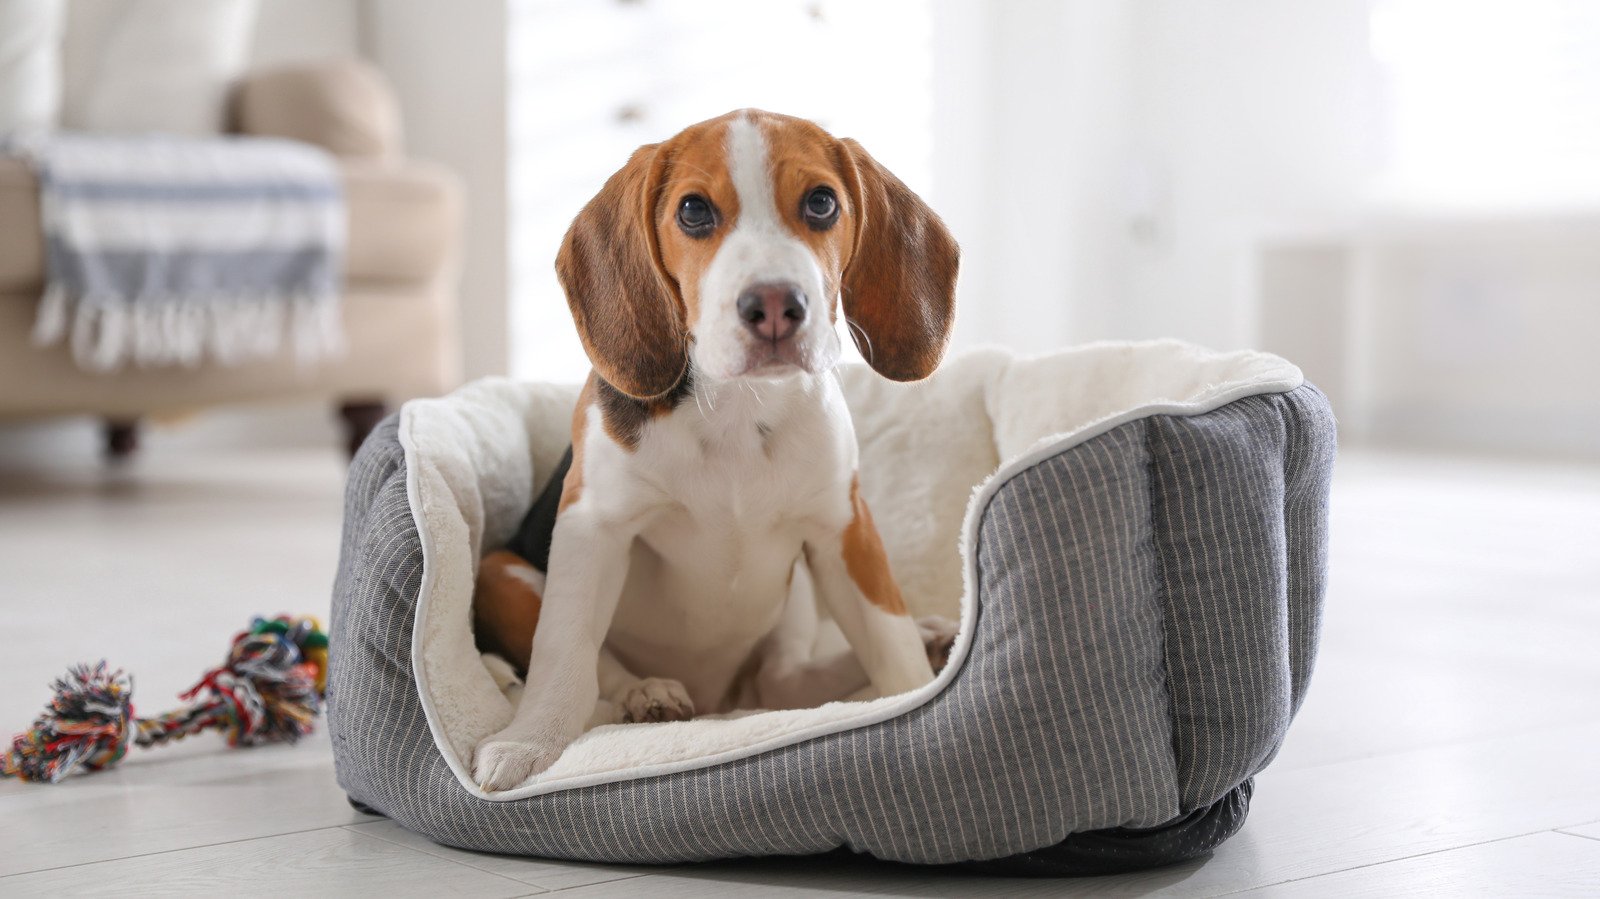 Throw Your Dog Bedding Away Immediately If You Notice This